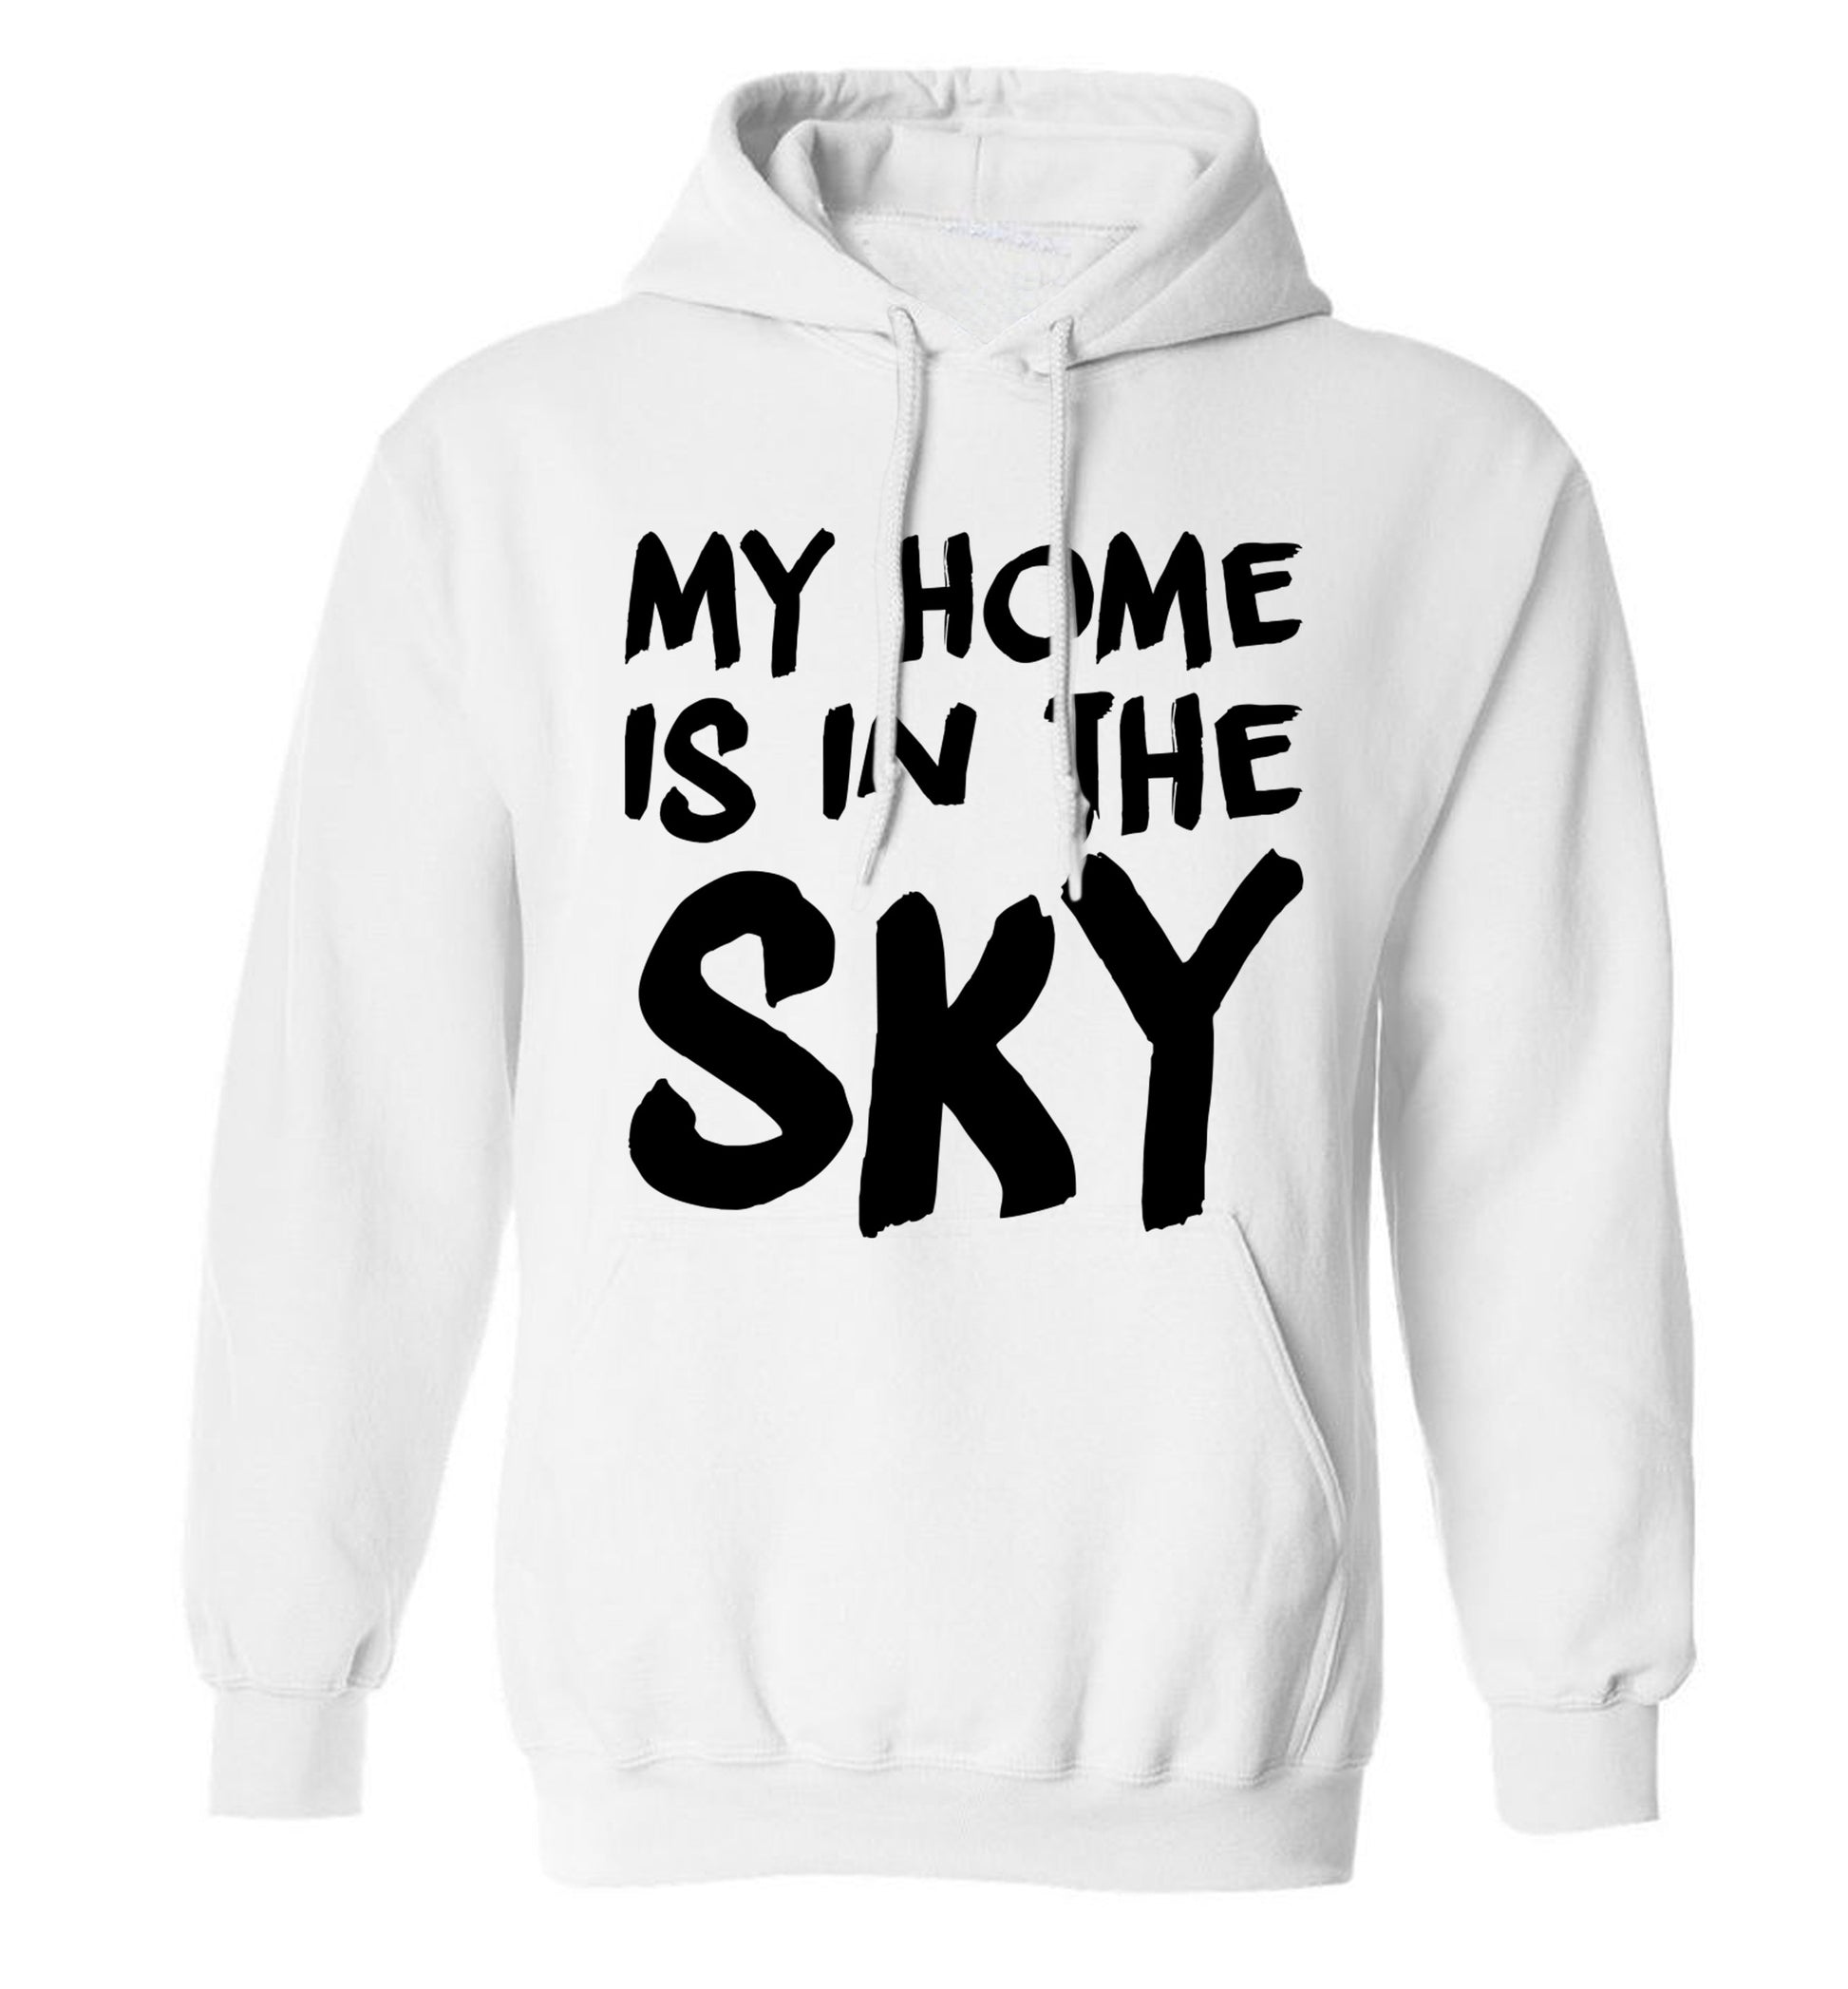 My home is in the sky adults unisex white hoodie 2XL